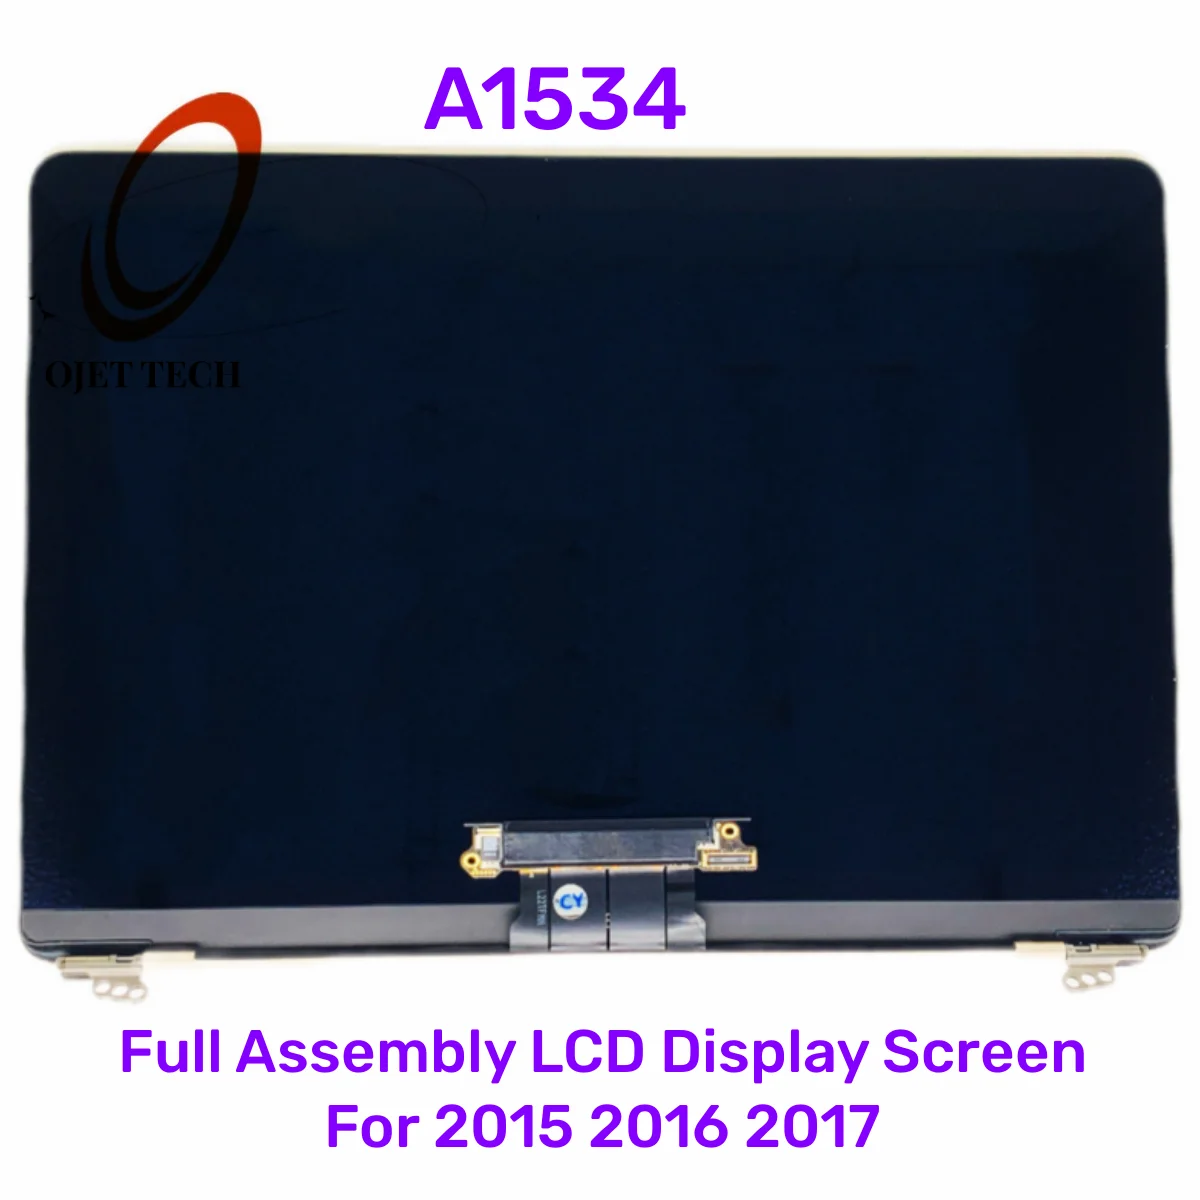 

Macbook Retina 12 Inch Original Brand New A1534 Full Assembly LCD Display Screen For 2015 2016 2017 Gray Sliver Gold Colors